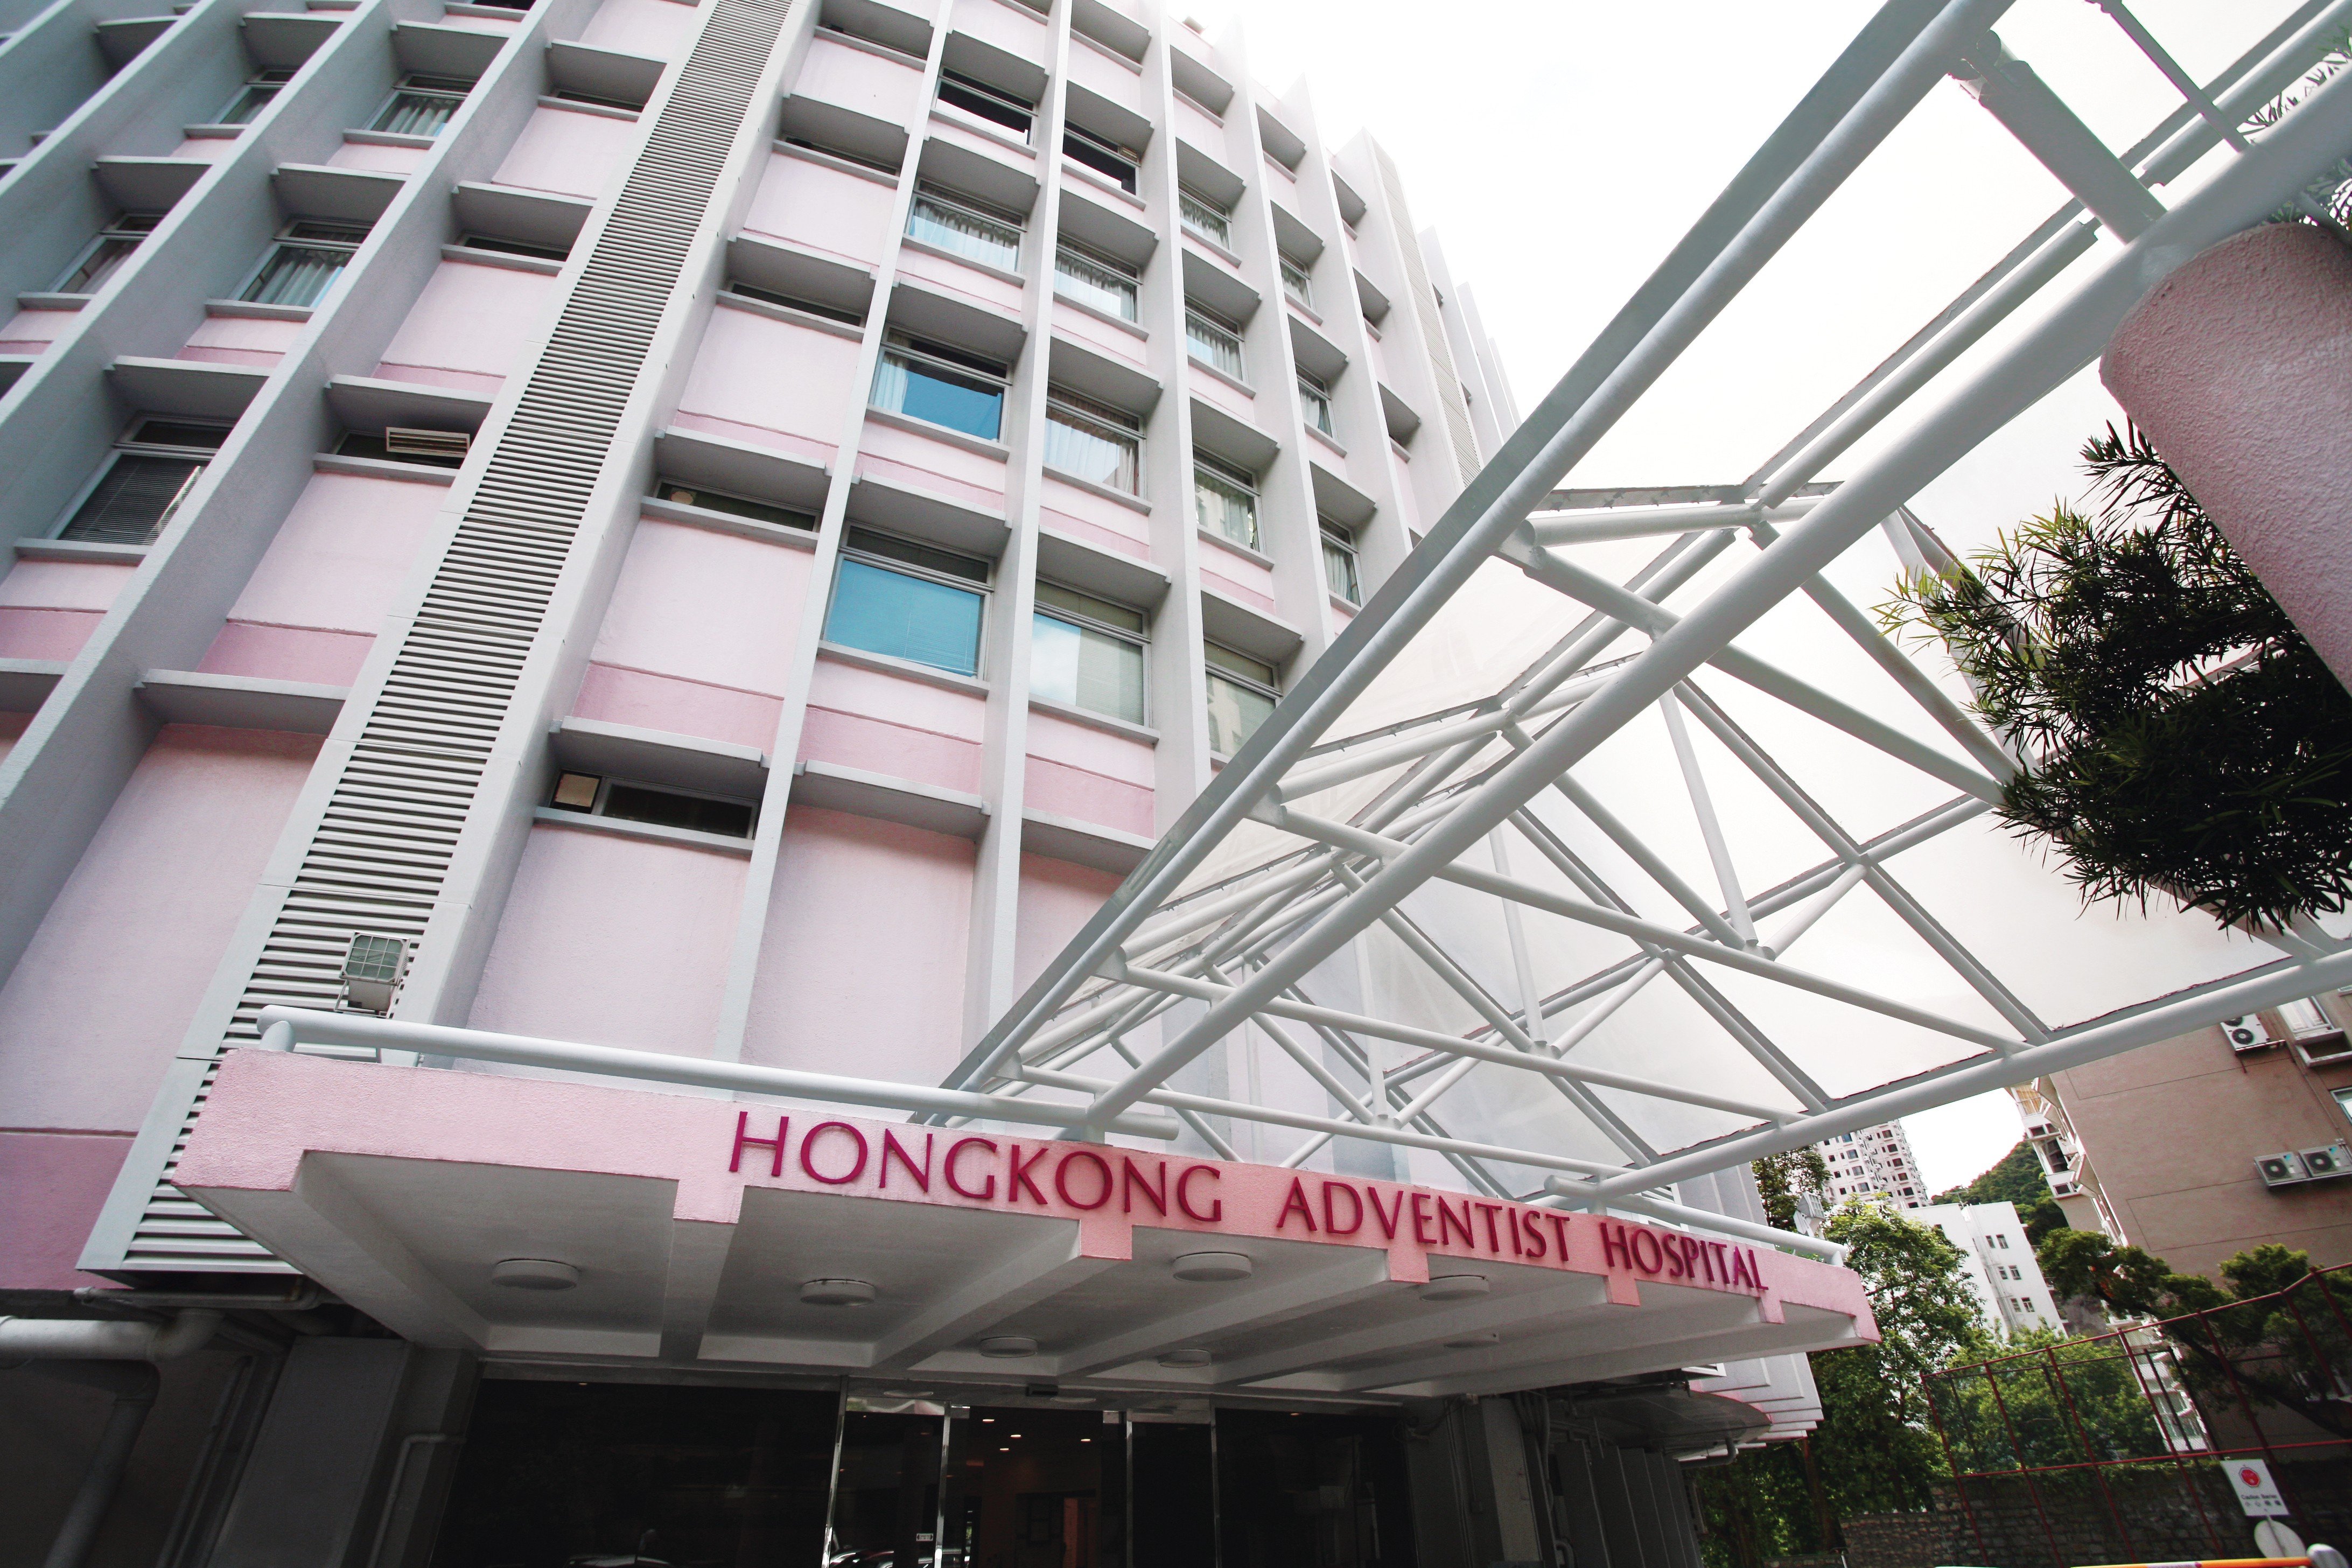 The entrance and circular tower at Hong Kong Adventist Hospital – Stubbs Road, which opened in Wan Chai in 1971. Photo: Hong Kong Adventist Hospital